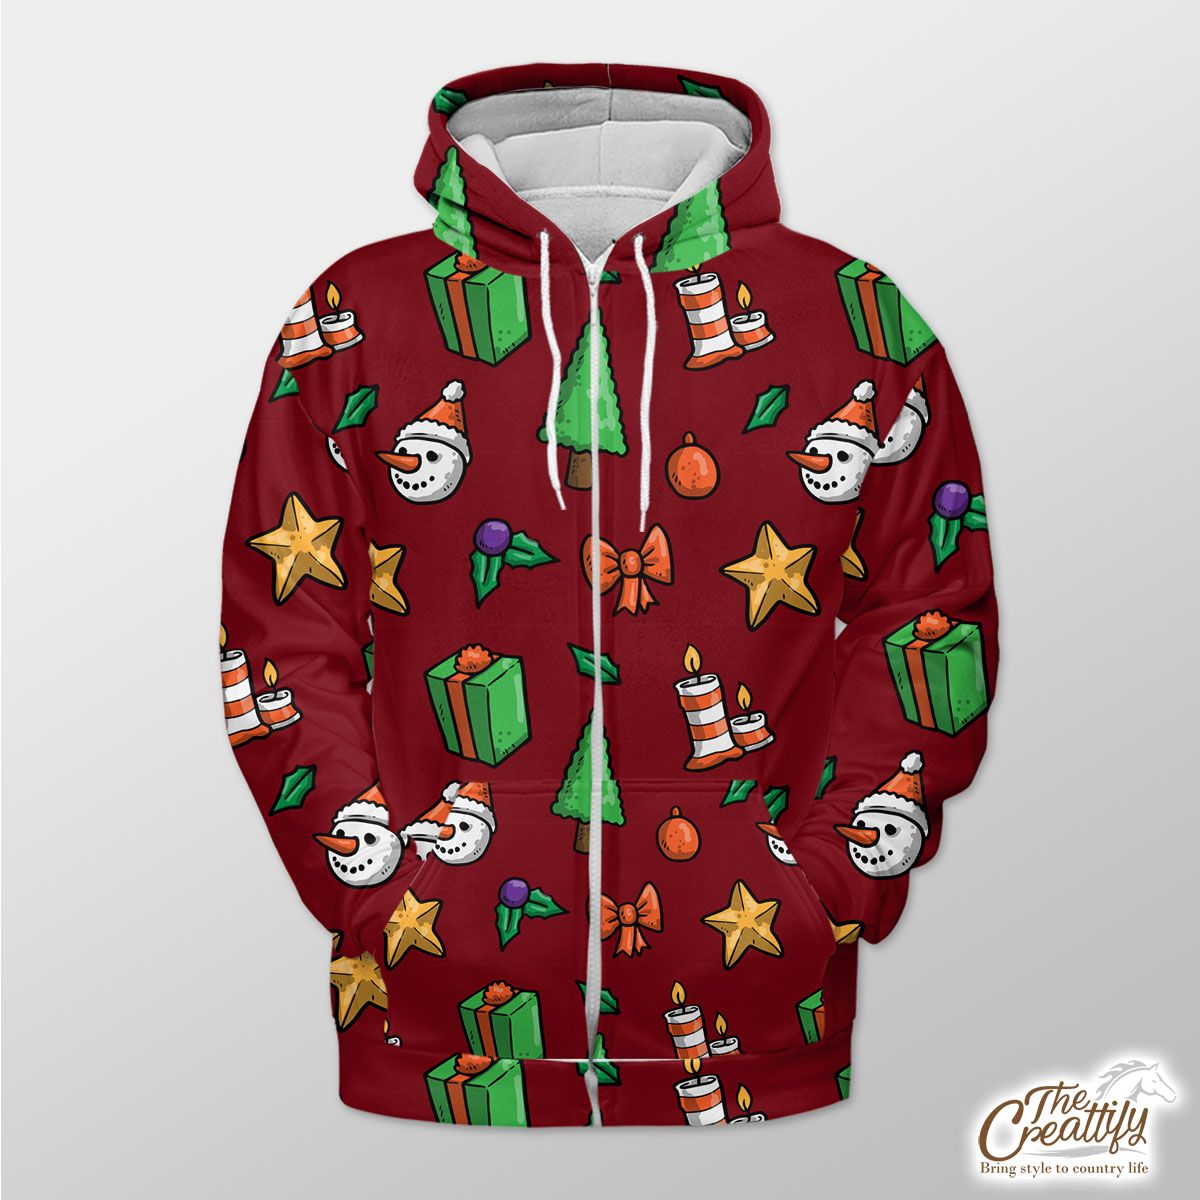 Christmas Gifts, Candles, Pine Tree And Snowman FaceWith Santa Hat Red Pattern Zip Hoodie